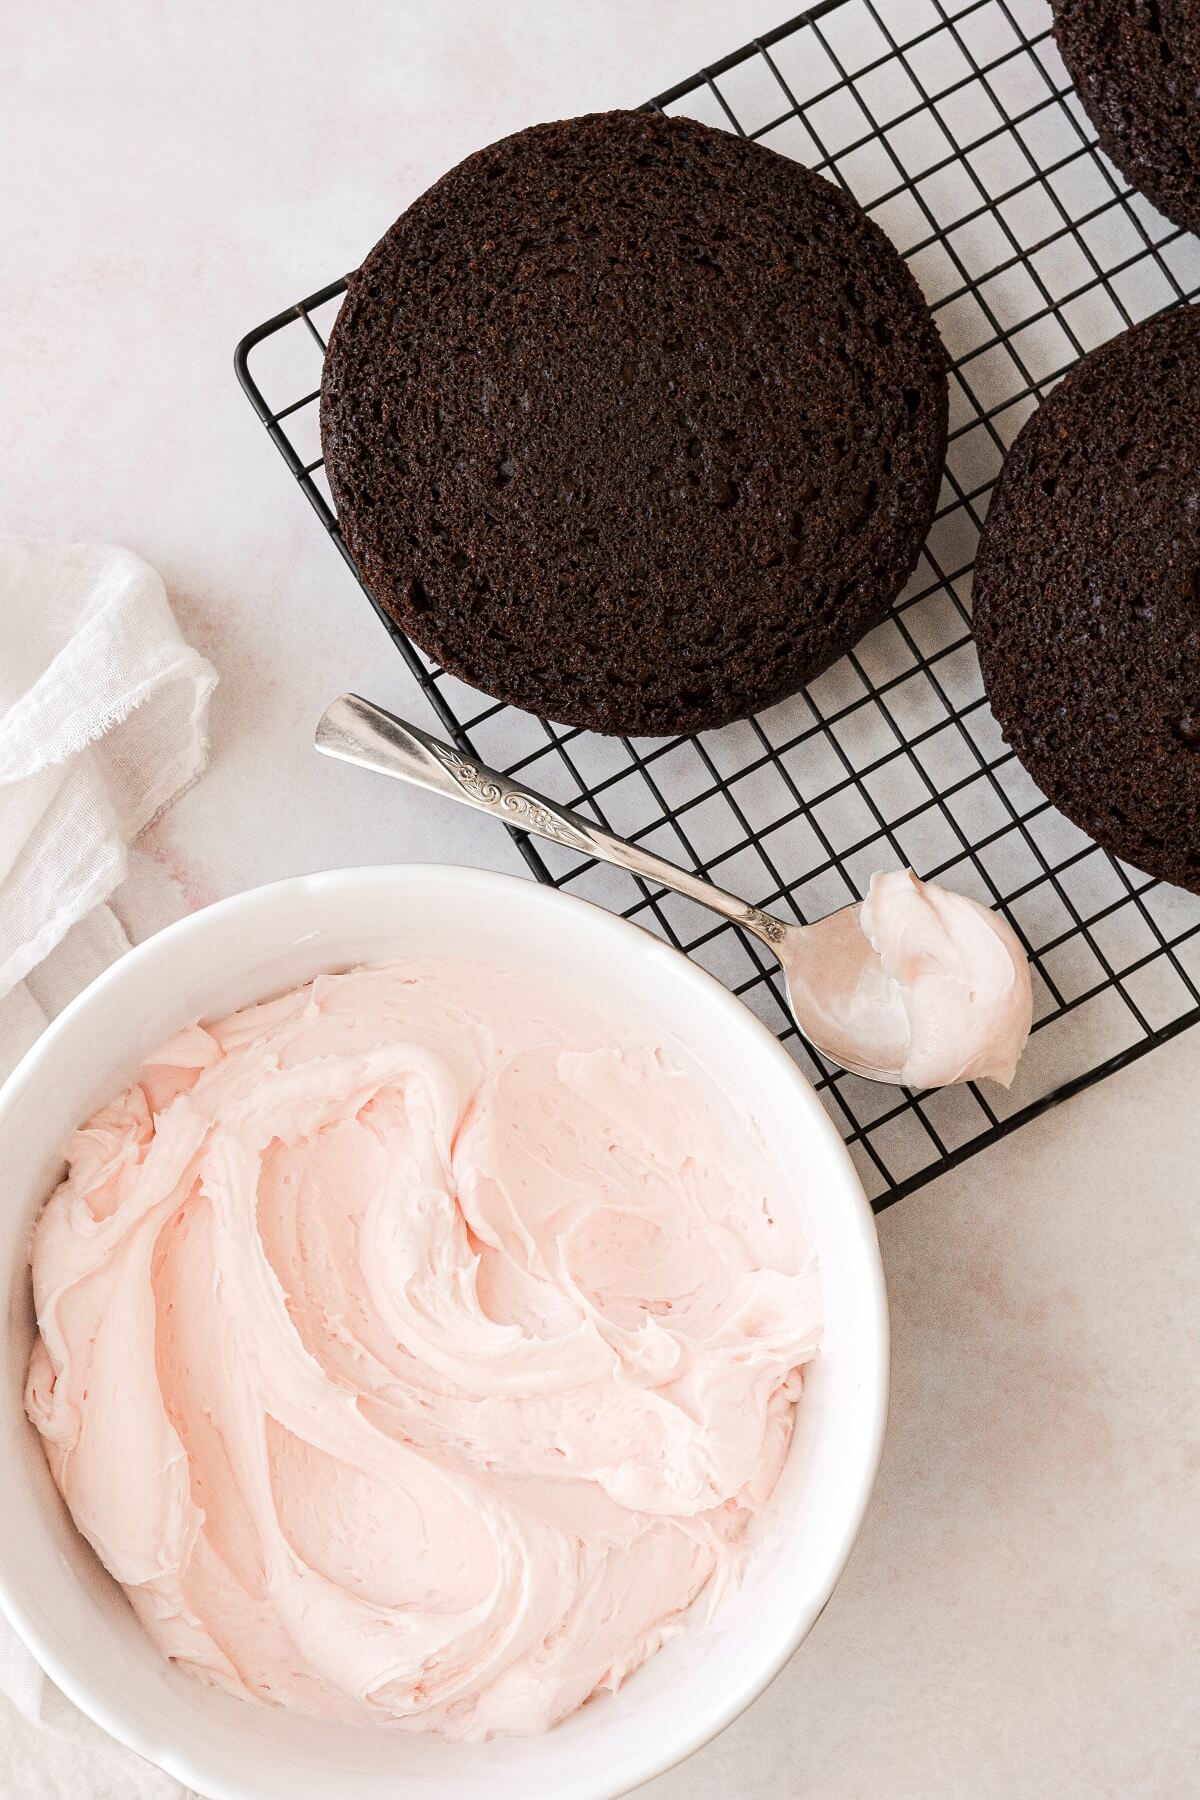 A cooling rack with layers of chocolate cake, next to a bowl of pale pink buttercream.